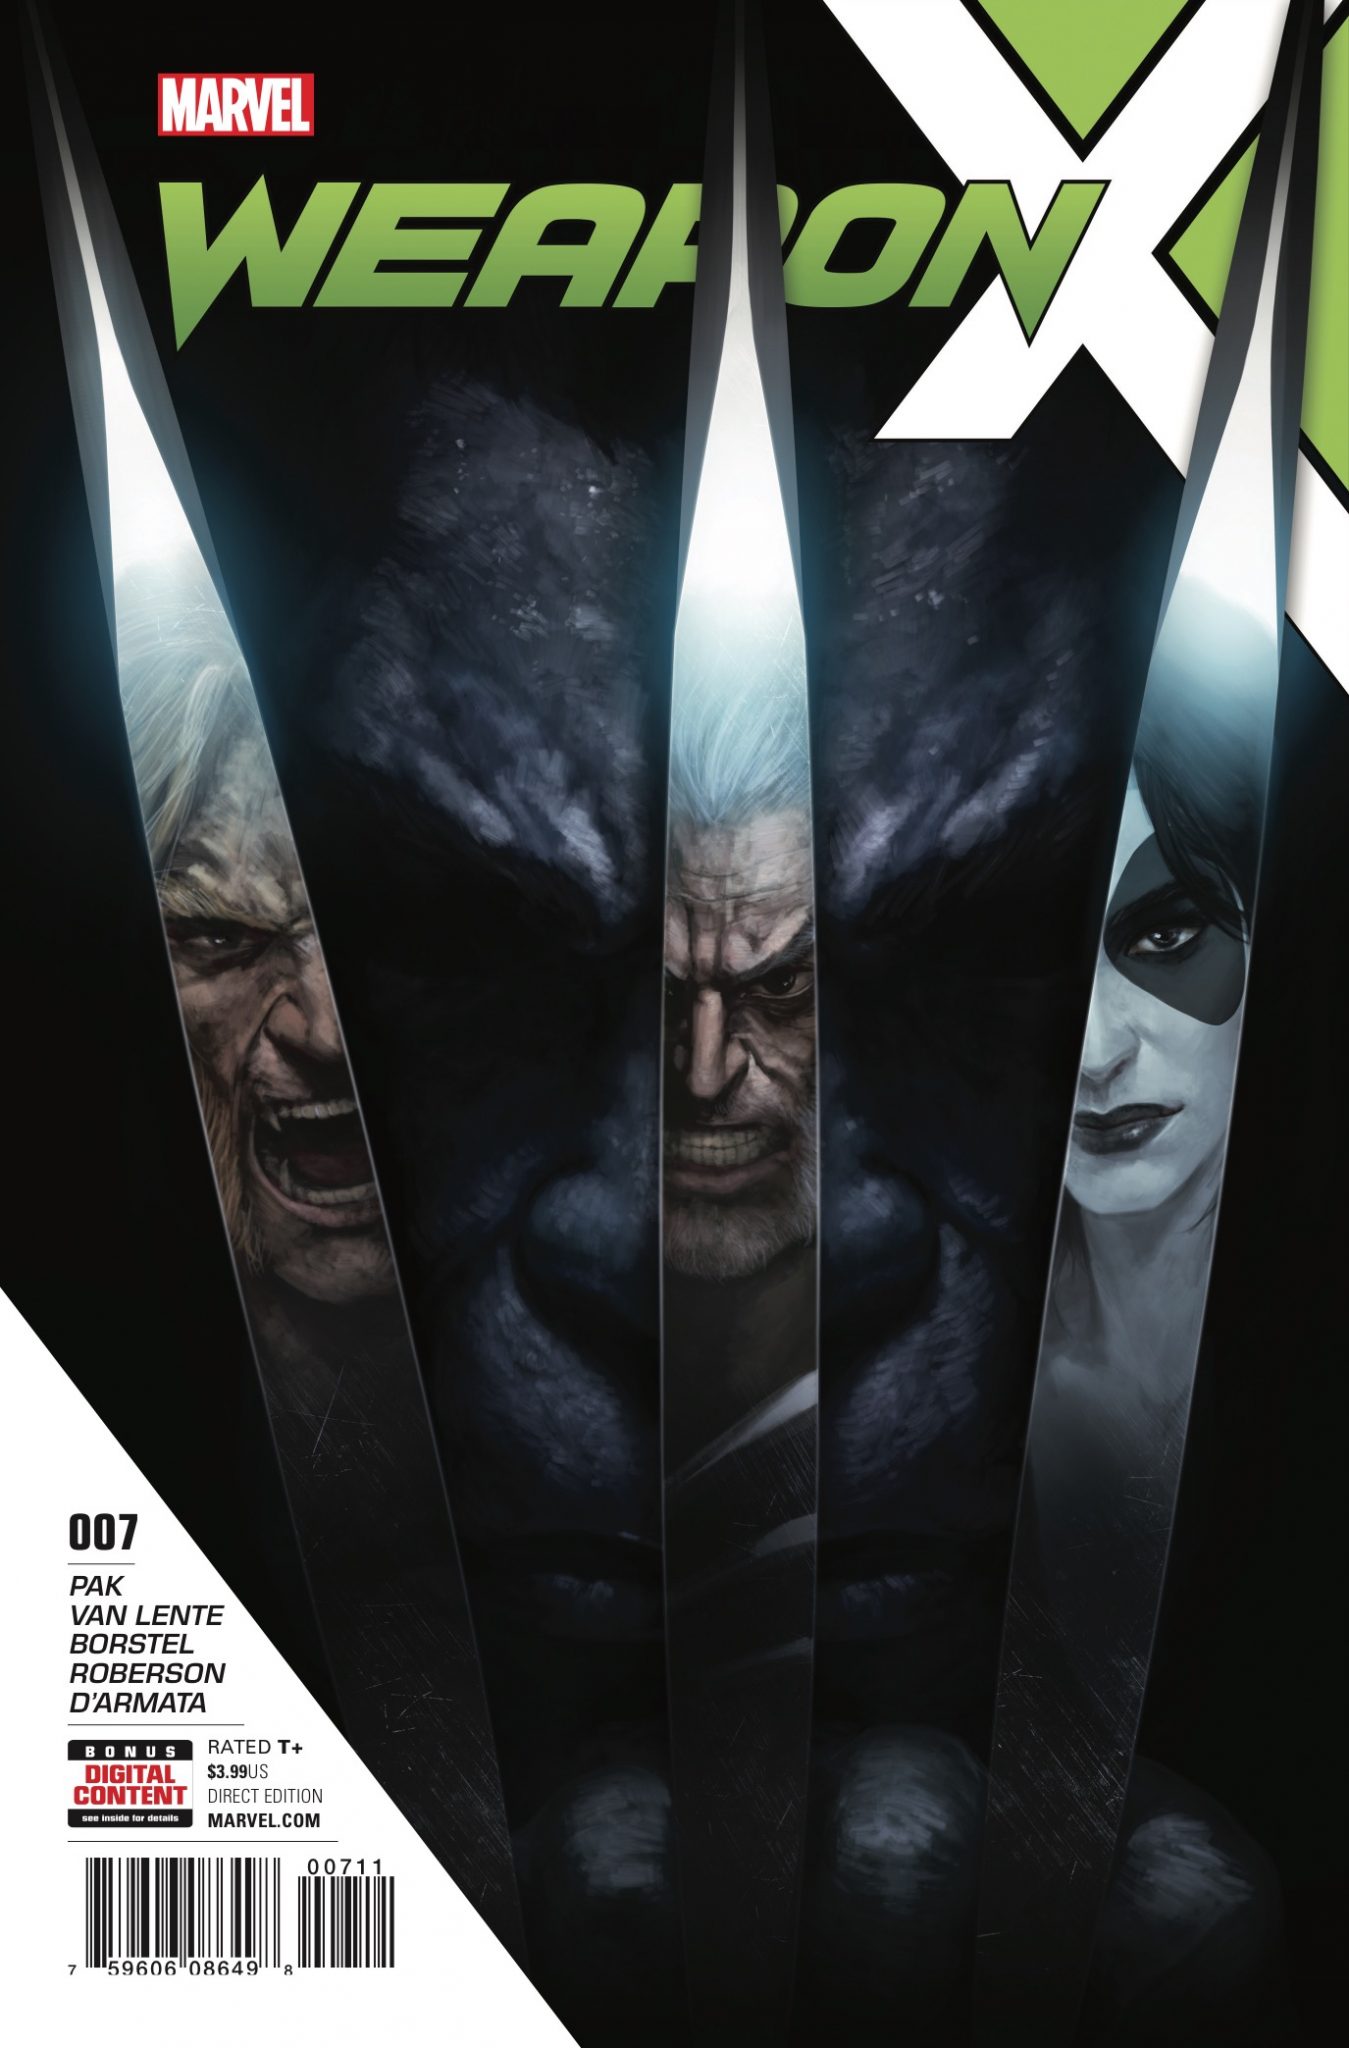 Weapon X #7 Review